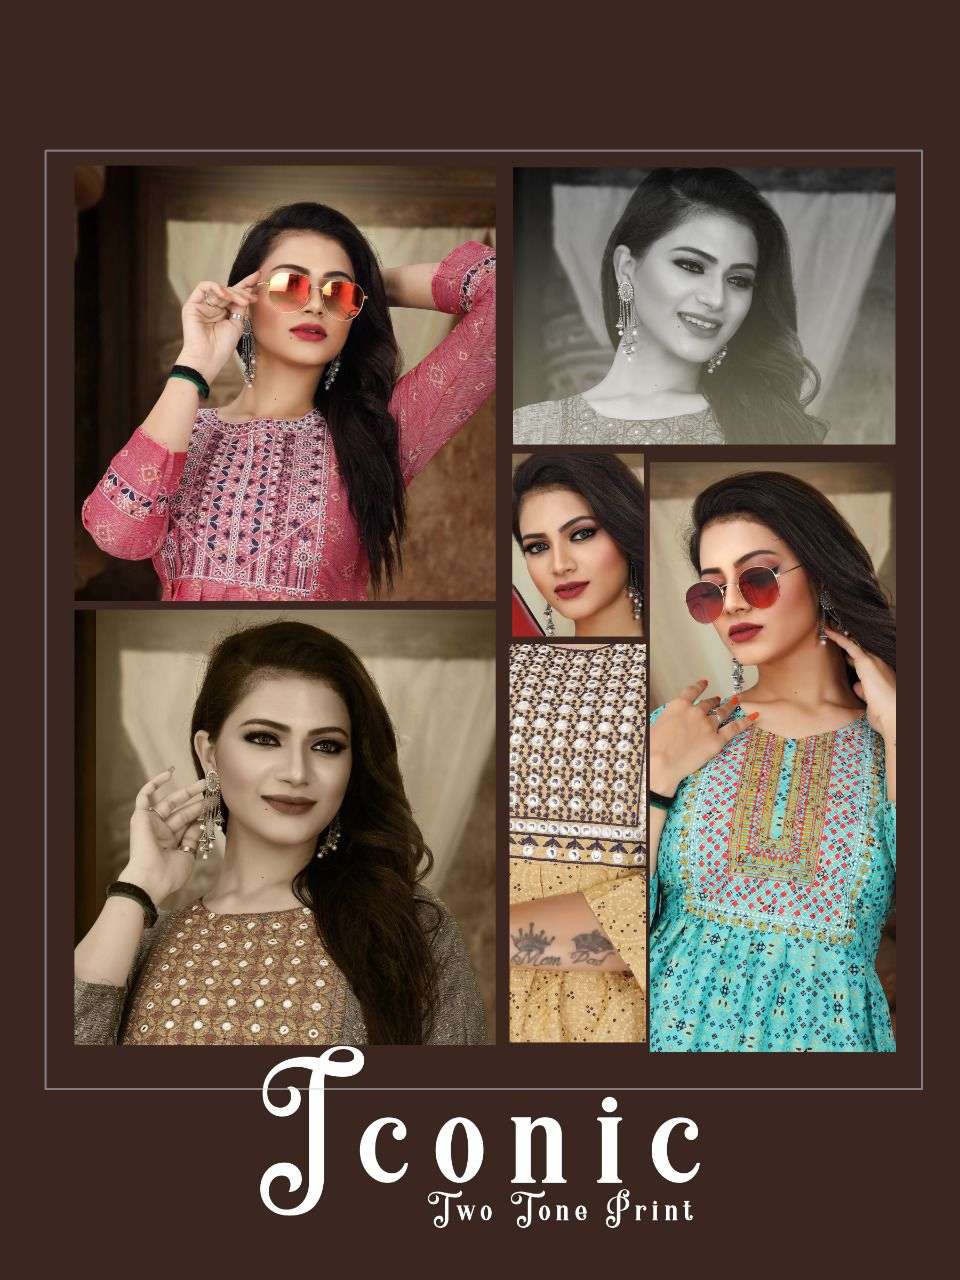 TRENDZ ICOONIC Rayon Two Tone Print Heavy Embroidered Kurti with Galla Work and Sleeve Work KURTI CATALOG WHOLESALER BEST RATE